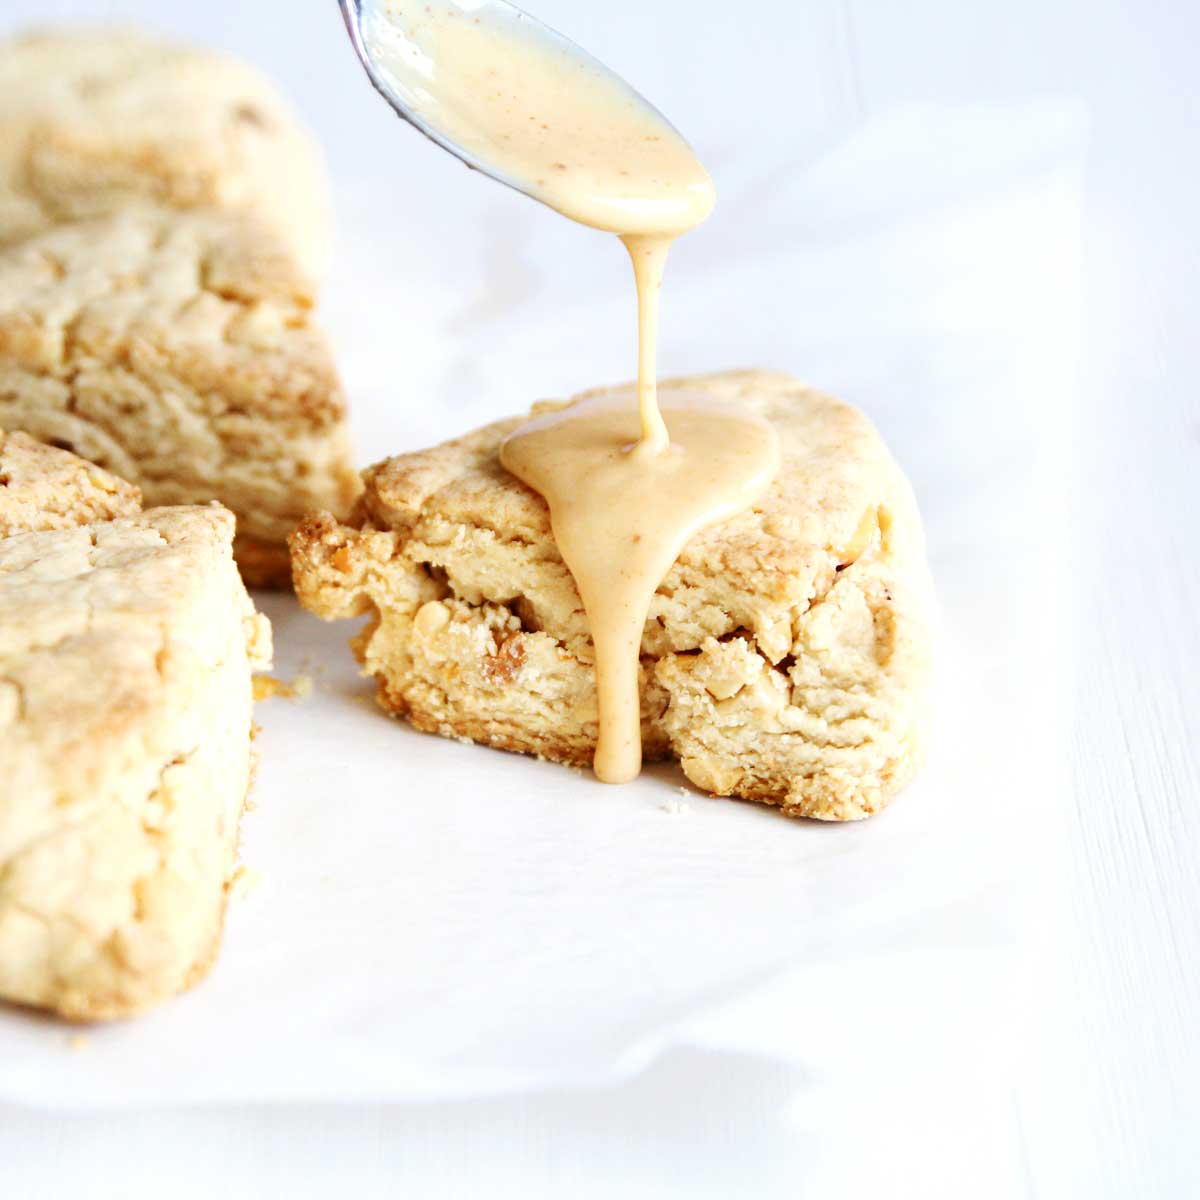 peanut butter scones with a pb fit glaze